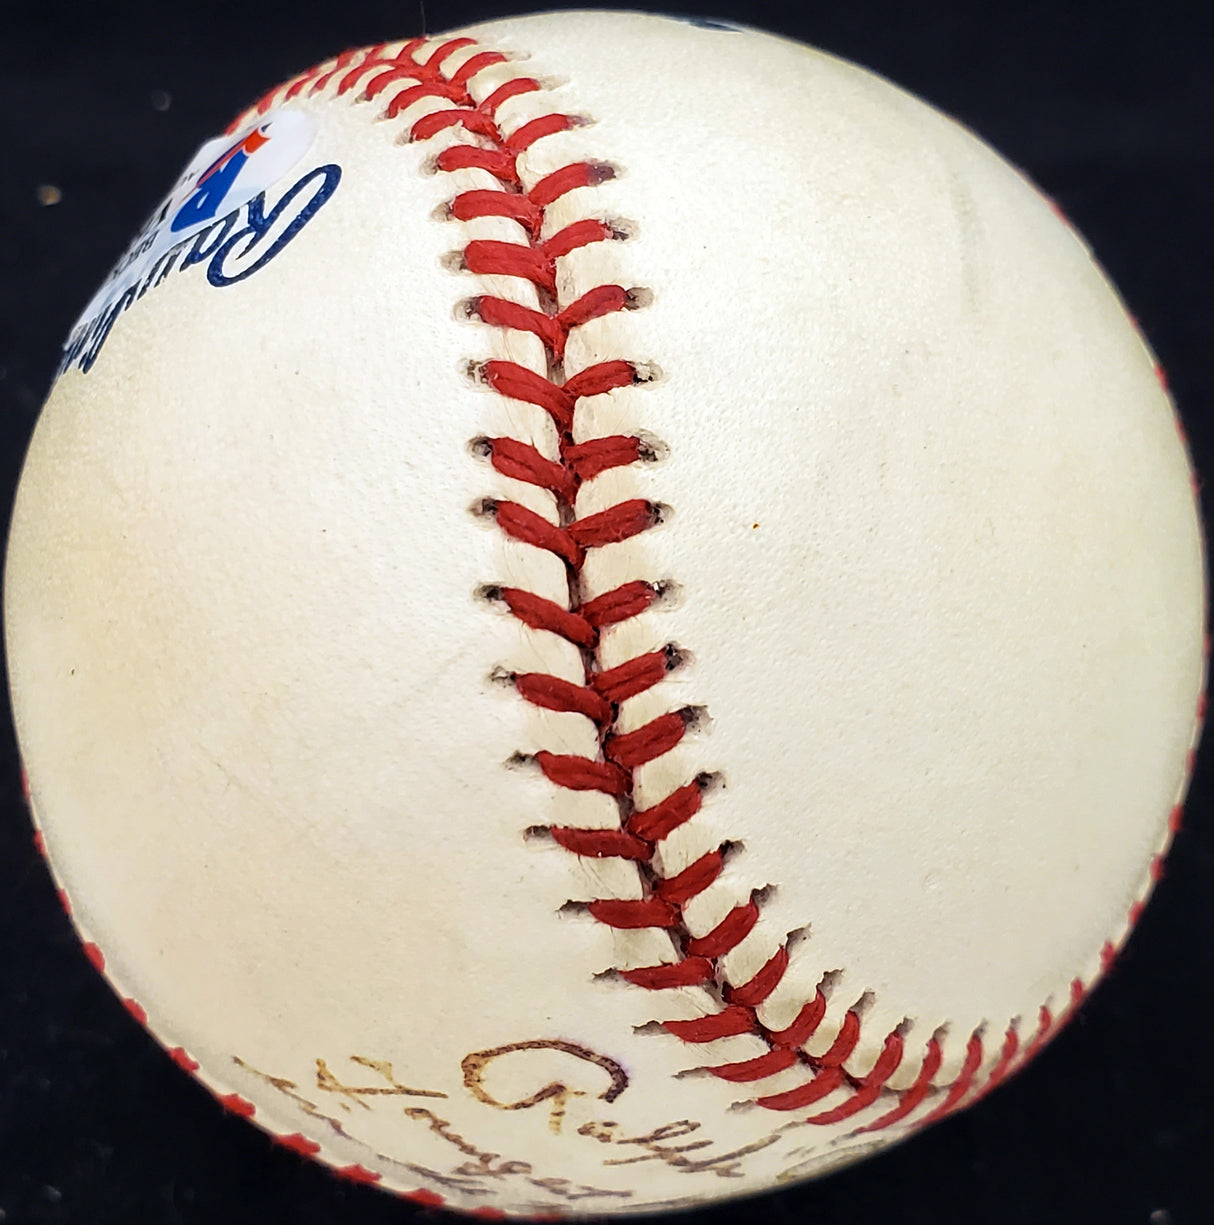 Ralph "Putsy" Caballero Autographed Official MLB Baseball Philadelphia Phillies "Youngest Player to Play 3rd Base in the Major Leagues 16 Years Old" Beckett BAS #V68058